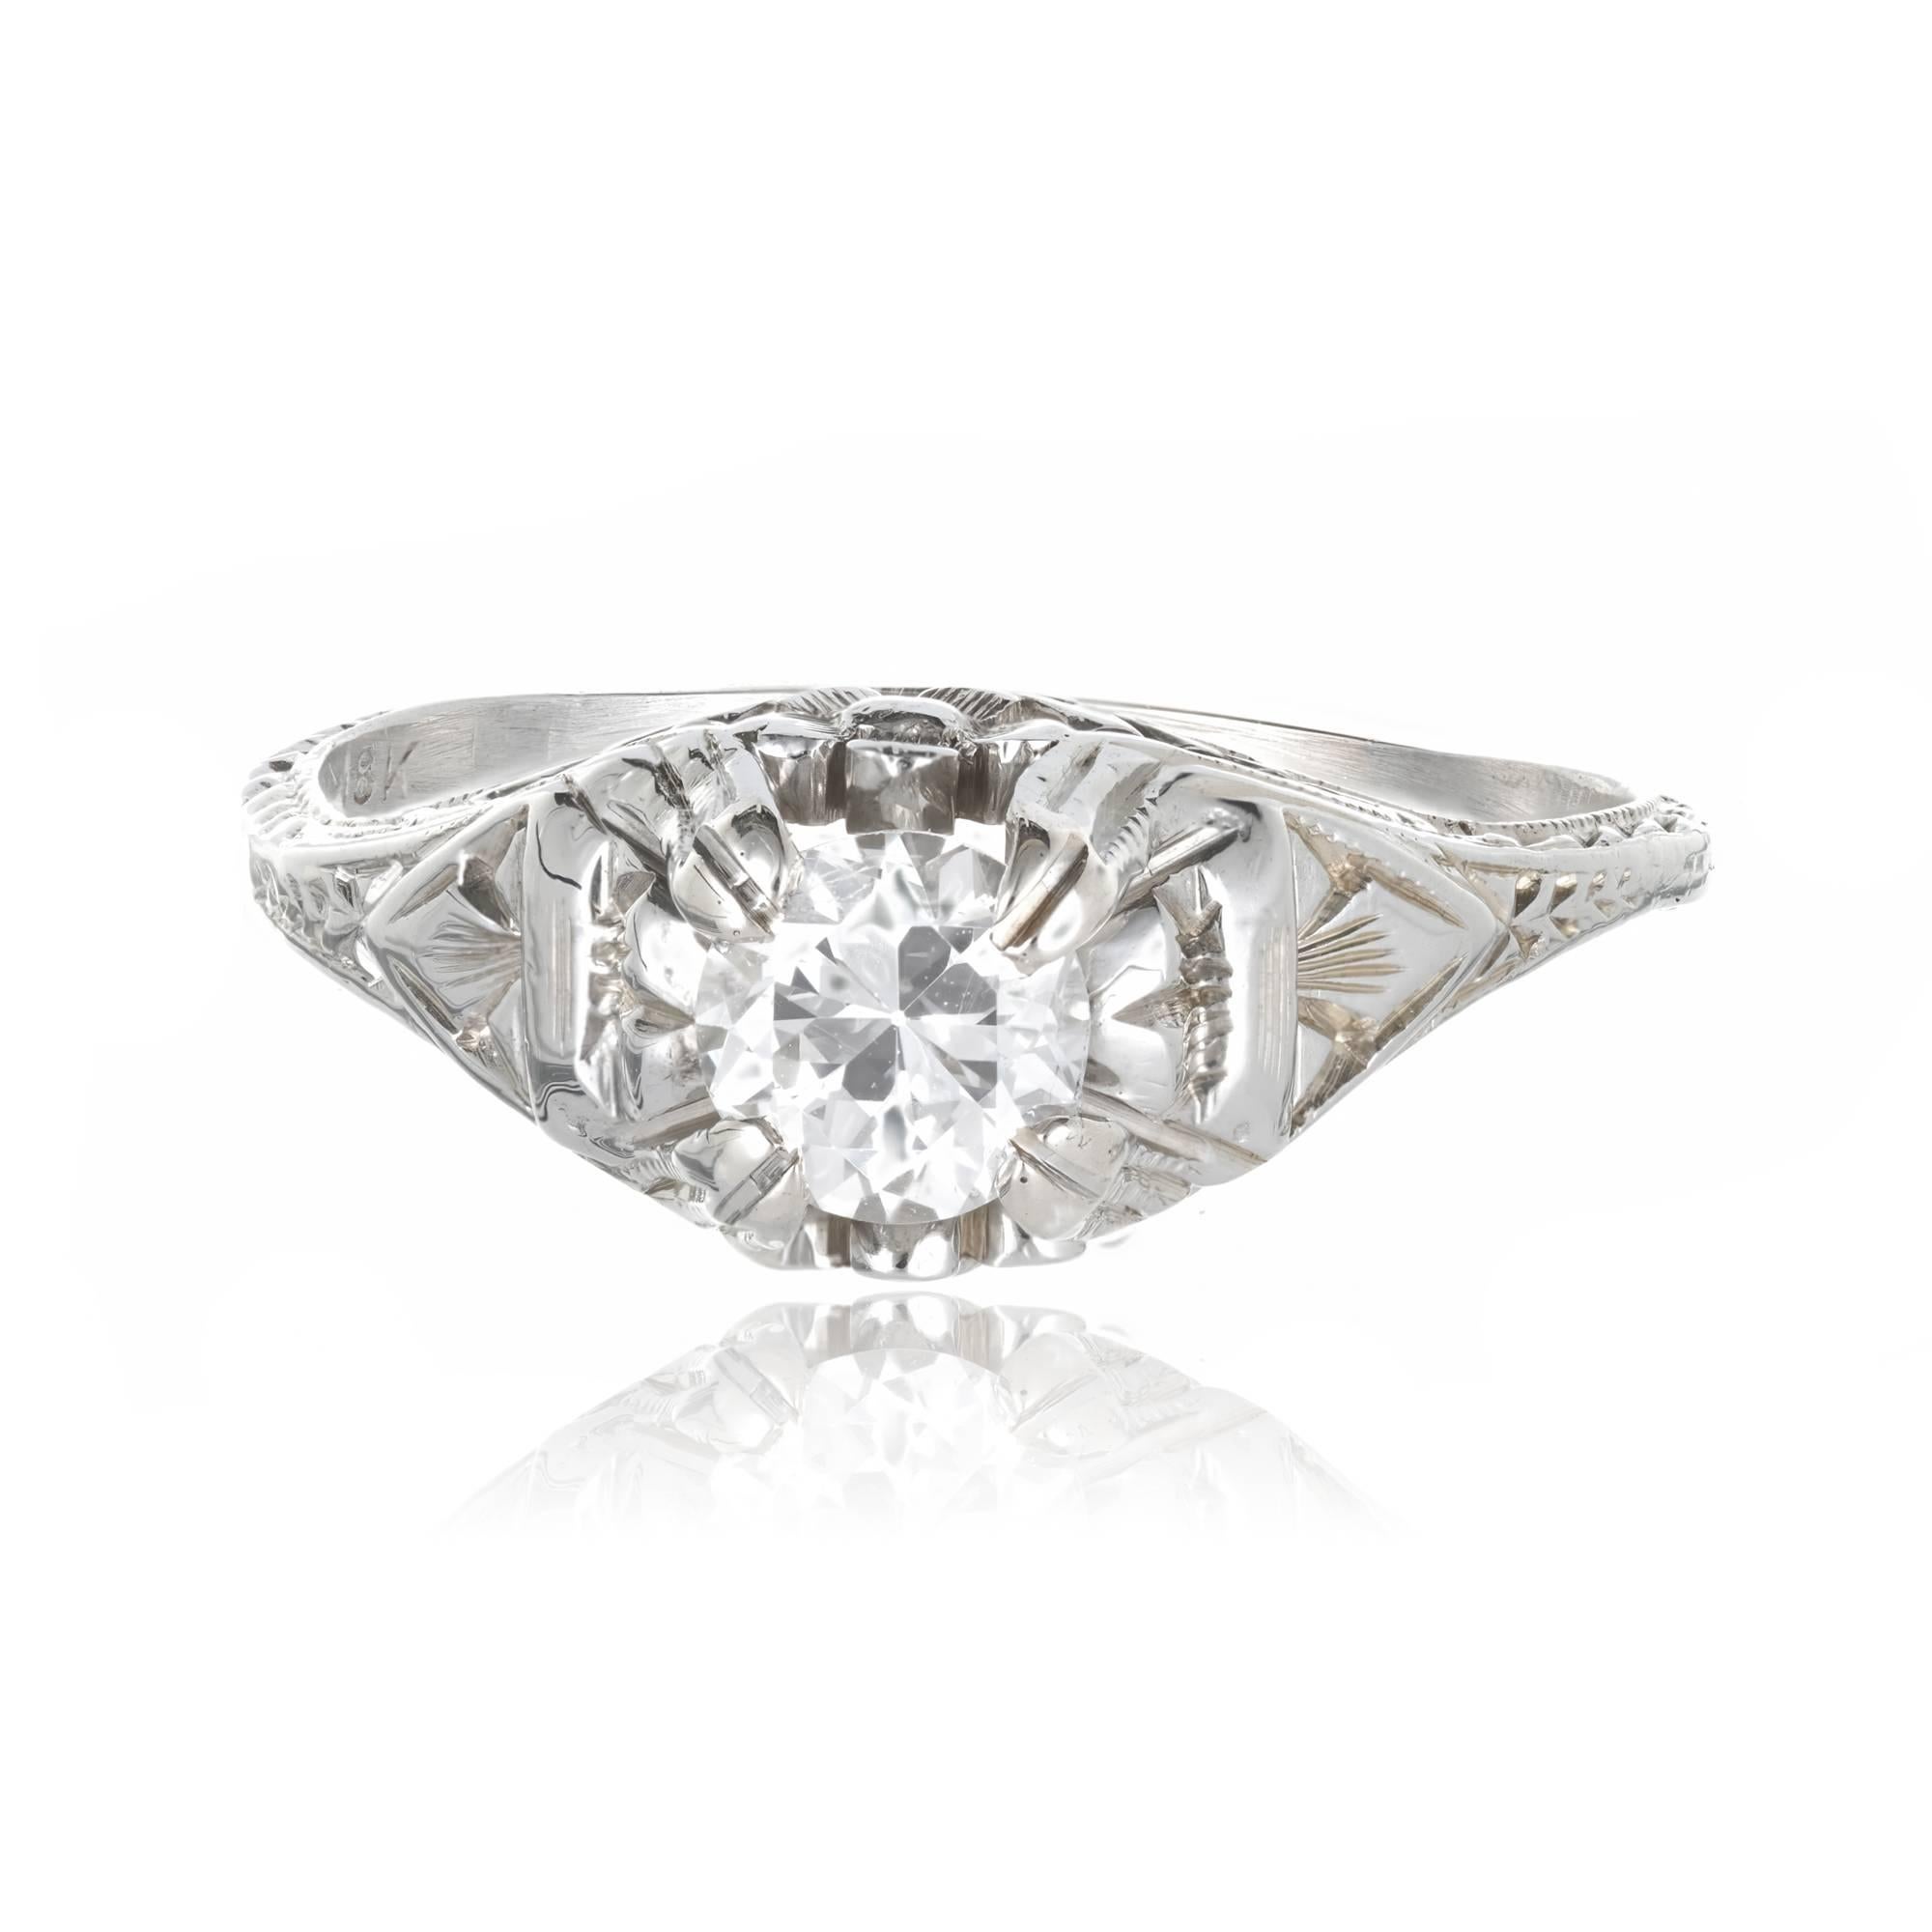 1930-1940 filigree transitional cut diamond engagement ring. Raised hand carved and filigree in its original 18k white gold setting.

1 transitional cut diamond, approx. total weight .40cts E - F, SI1, EGL certificate #US68998801D
Size 6 and